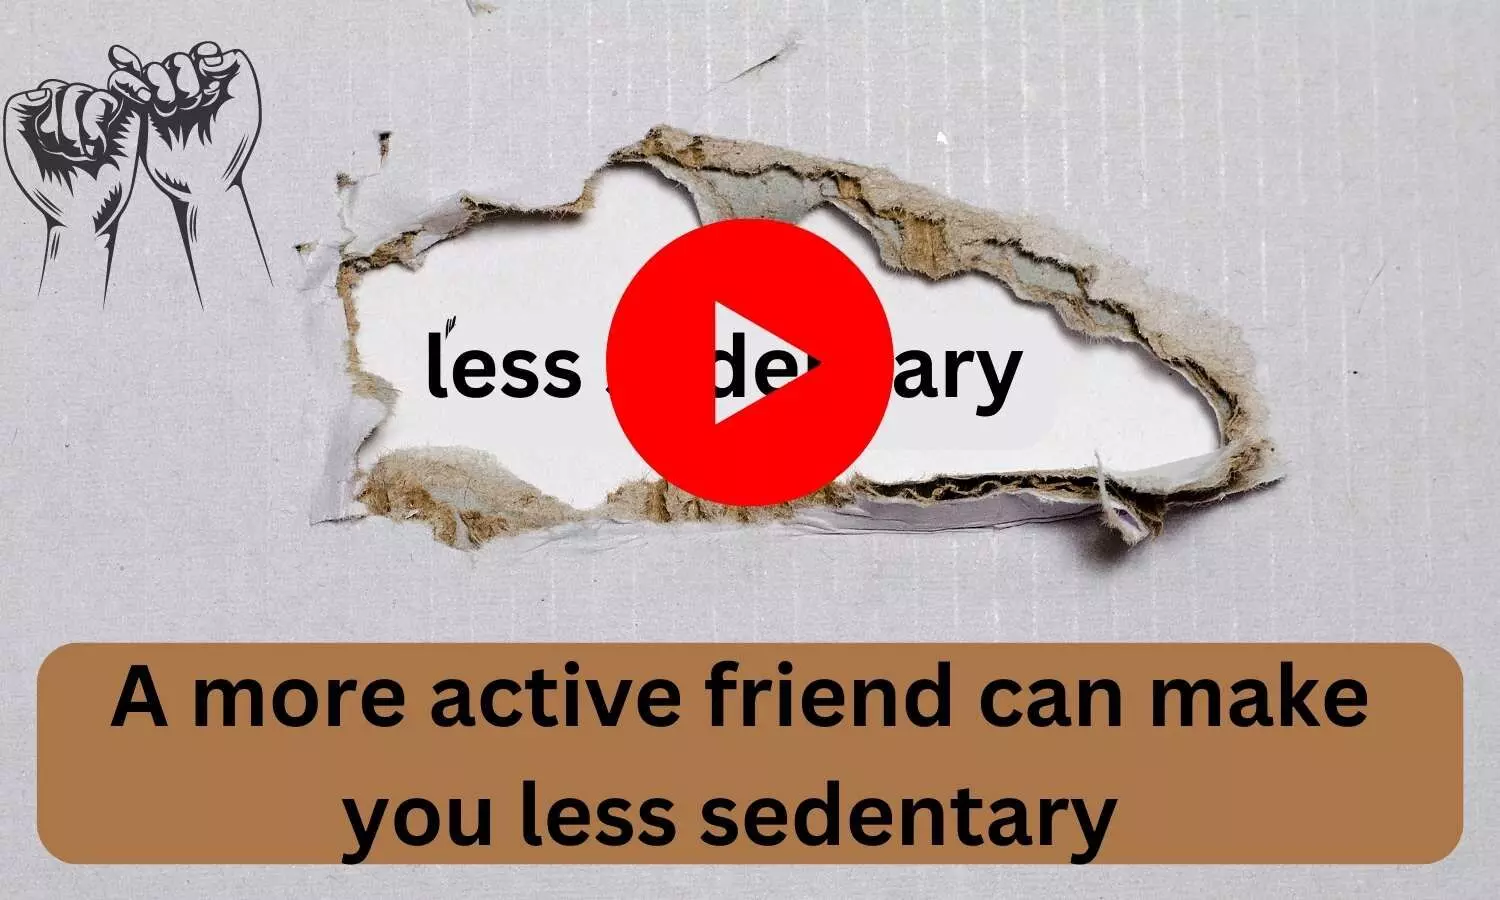 A more active friend can make you less sedentary